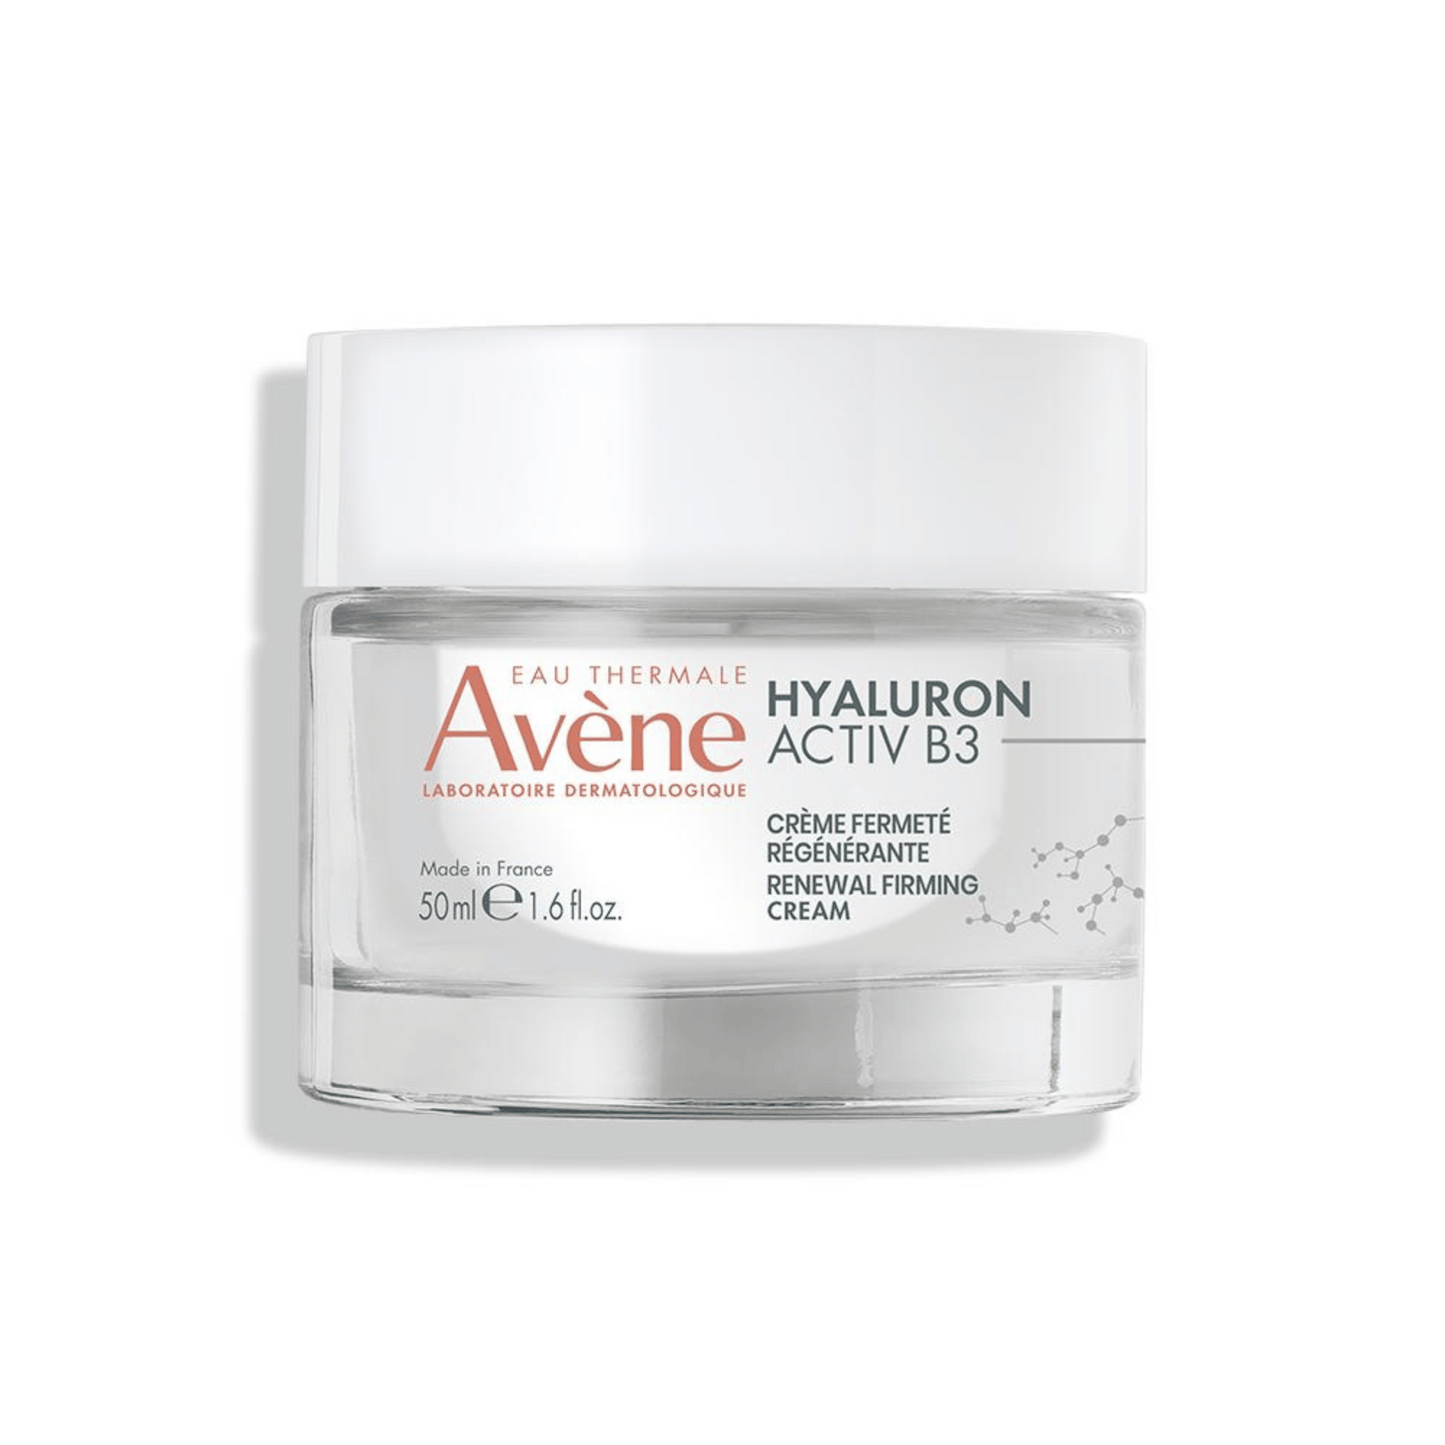 Primary Image of Hyaluron Activ B3 Cream